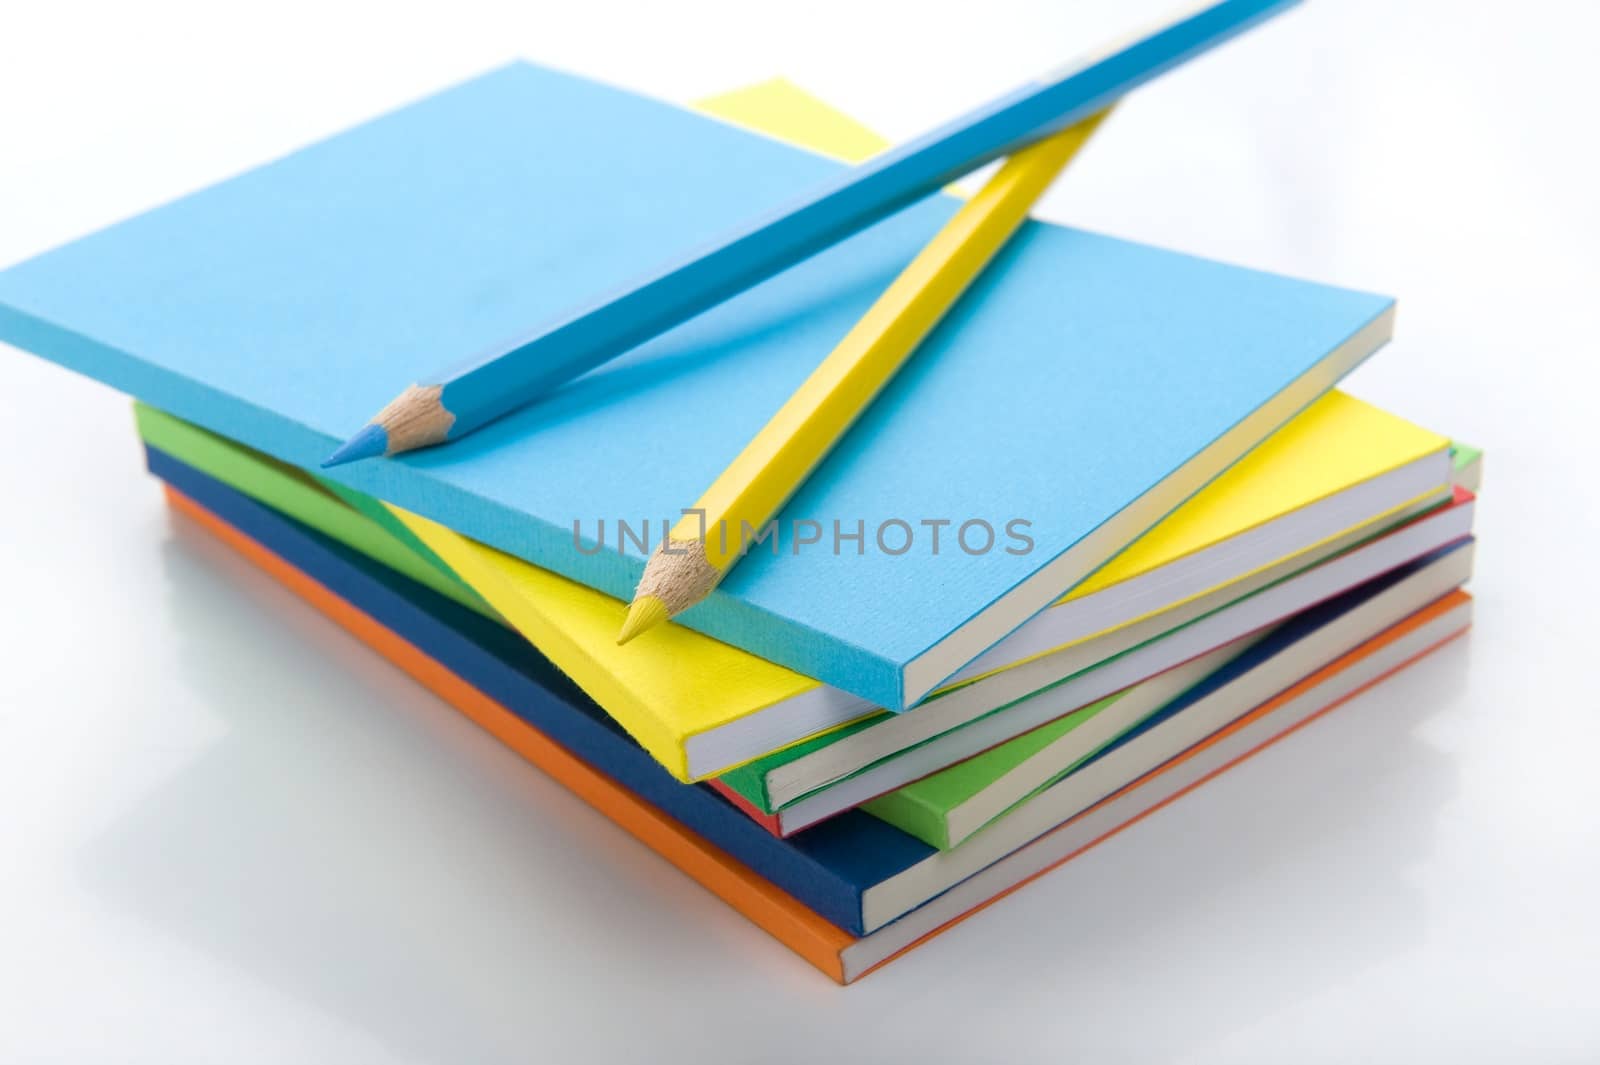 Horizontal isolated on white background close-up of blue and yellow pencils on top id workbook pile